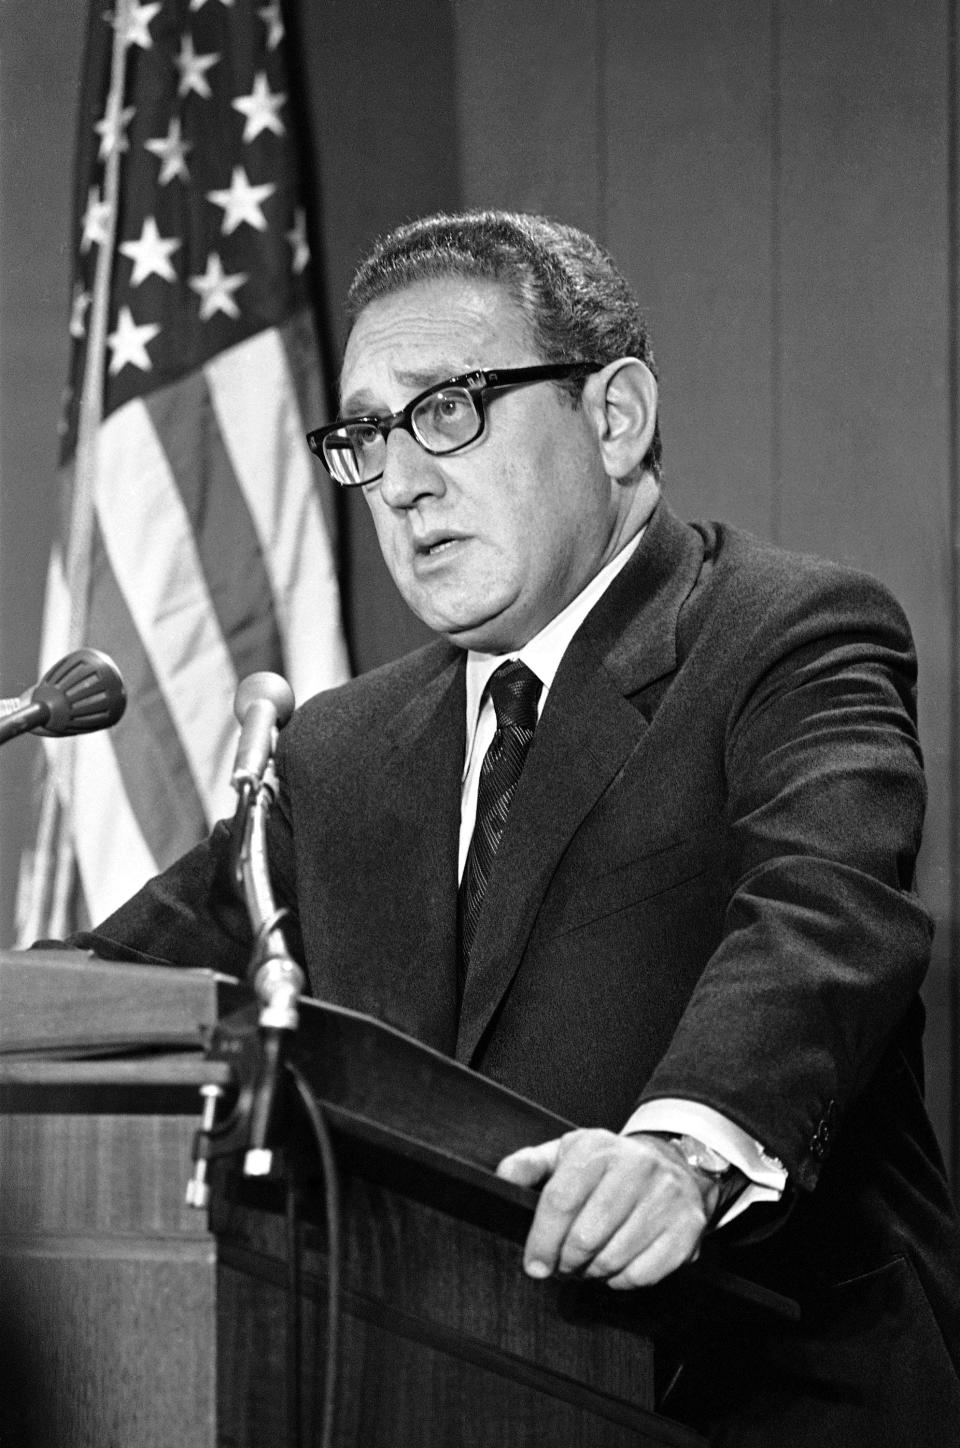 Secretary of State Henry Kissinger briefs newsmen on the Middle East peace situation and oil boycott during a news conference in Washington, Thursday, Dec. 7, 1973. (AP Photo)